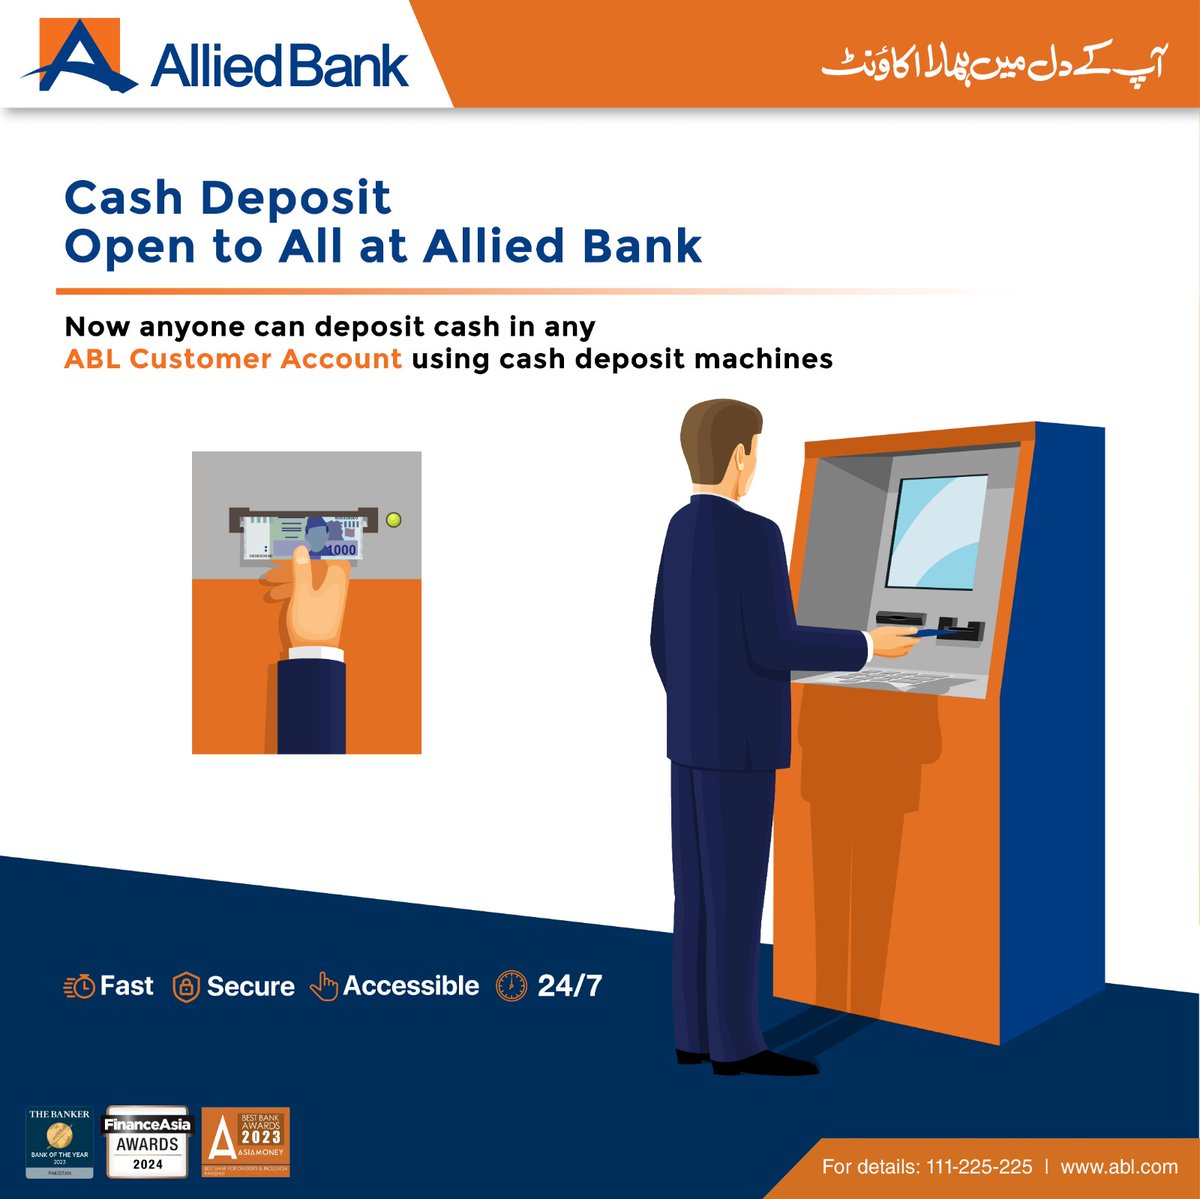 Walk-in customers can now deposit cash and cheques into any ABL account without needing to visit the bank, via our CCDM machines. We're expanding our services to make banking more convenient for everyone. 

#ABL #CashDeposits #ChequeDeposits #Banking #BankingInnovation